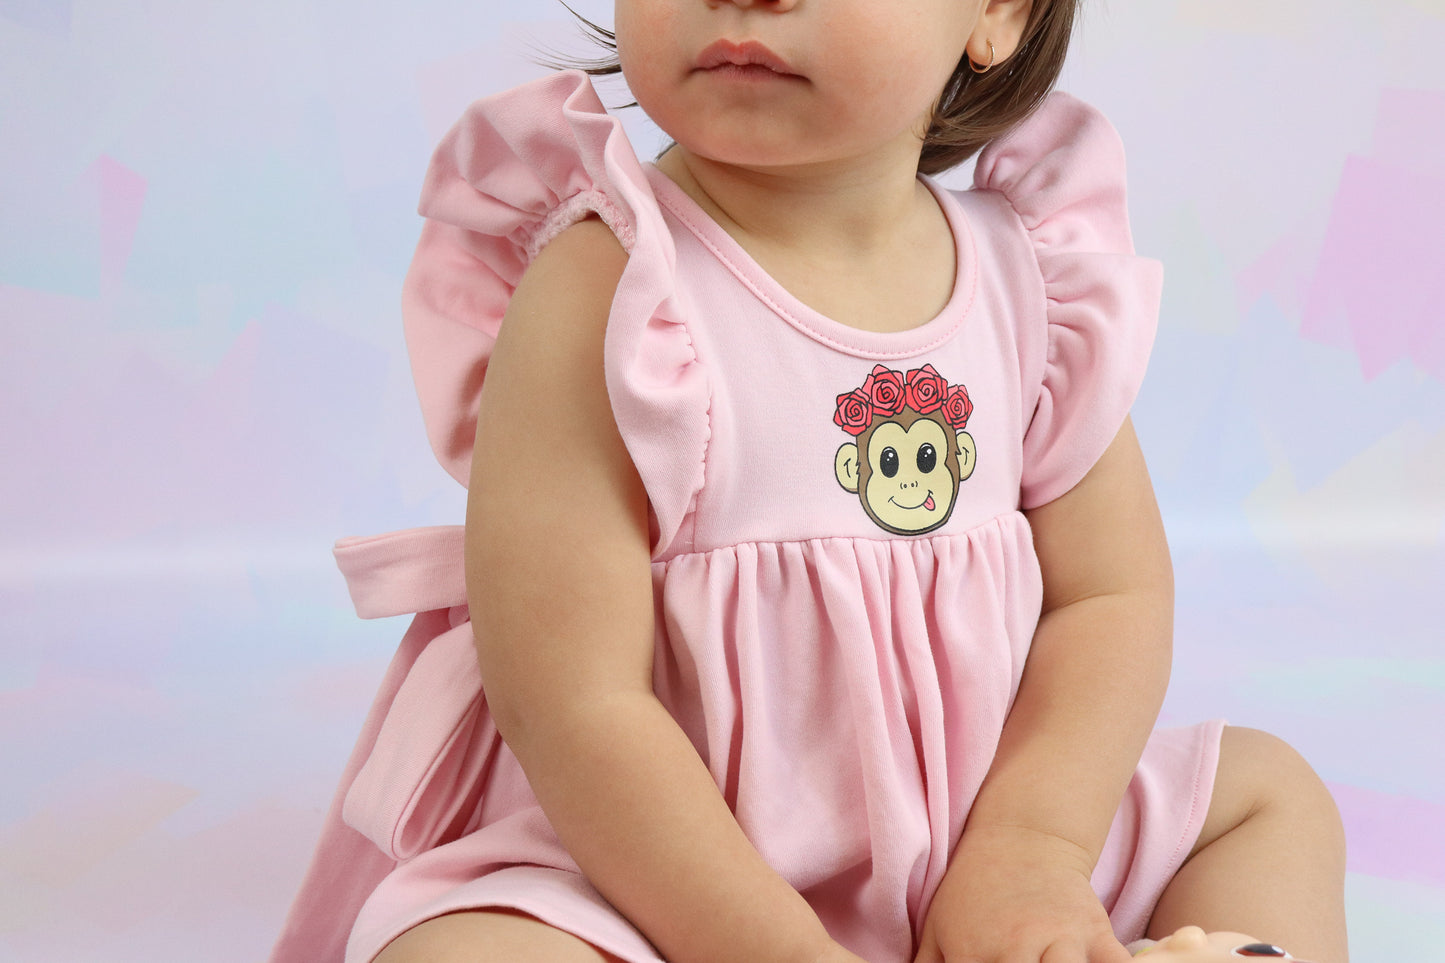 toddler girl sitting down wearing a pastel pink dress with a cute monkey face printed on it